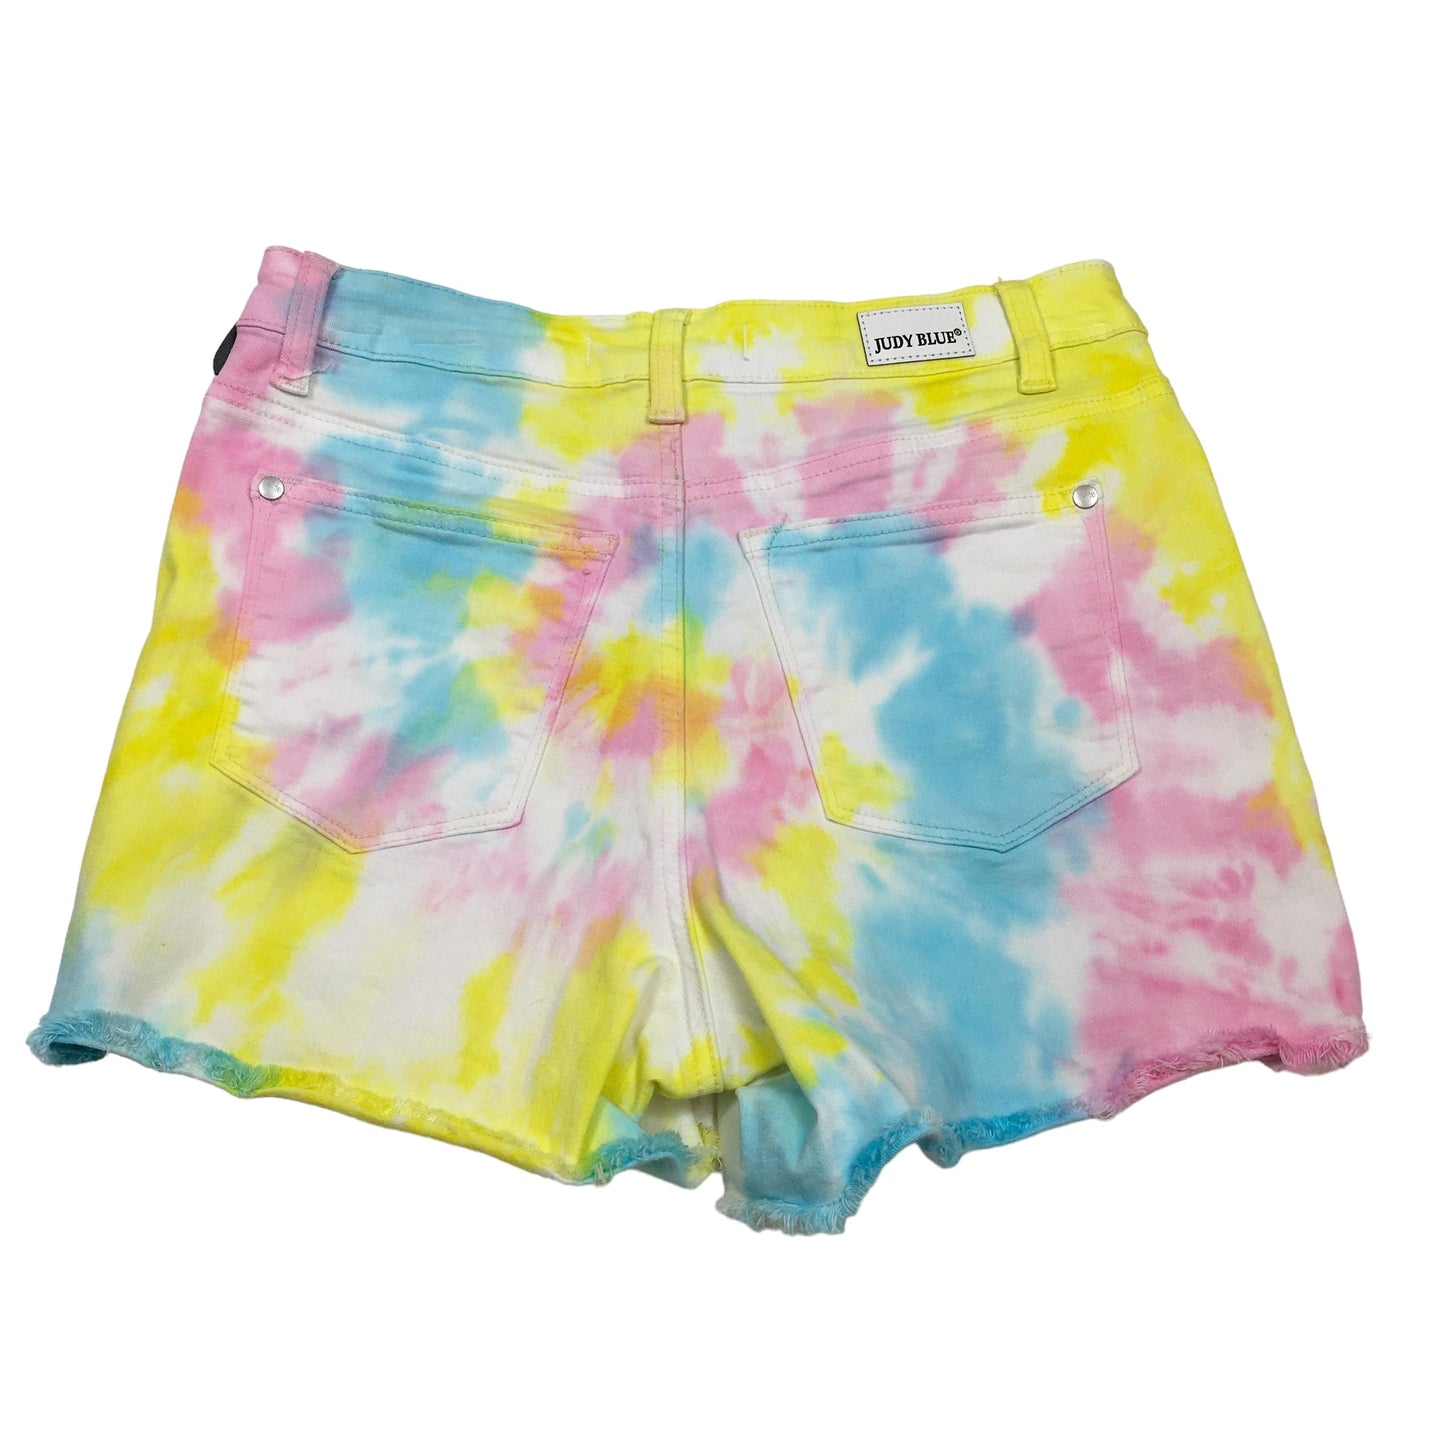 Multi-colored Shorts Judy Blue, Size S